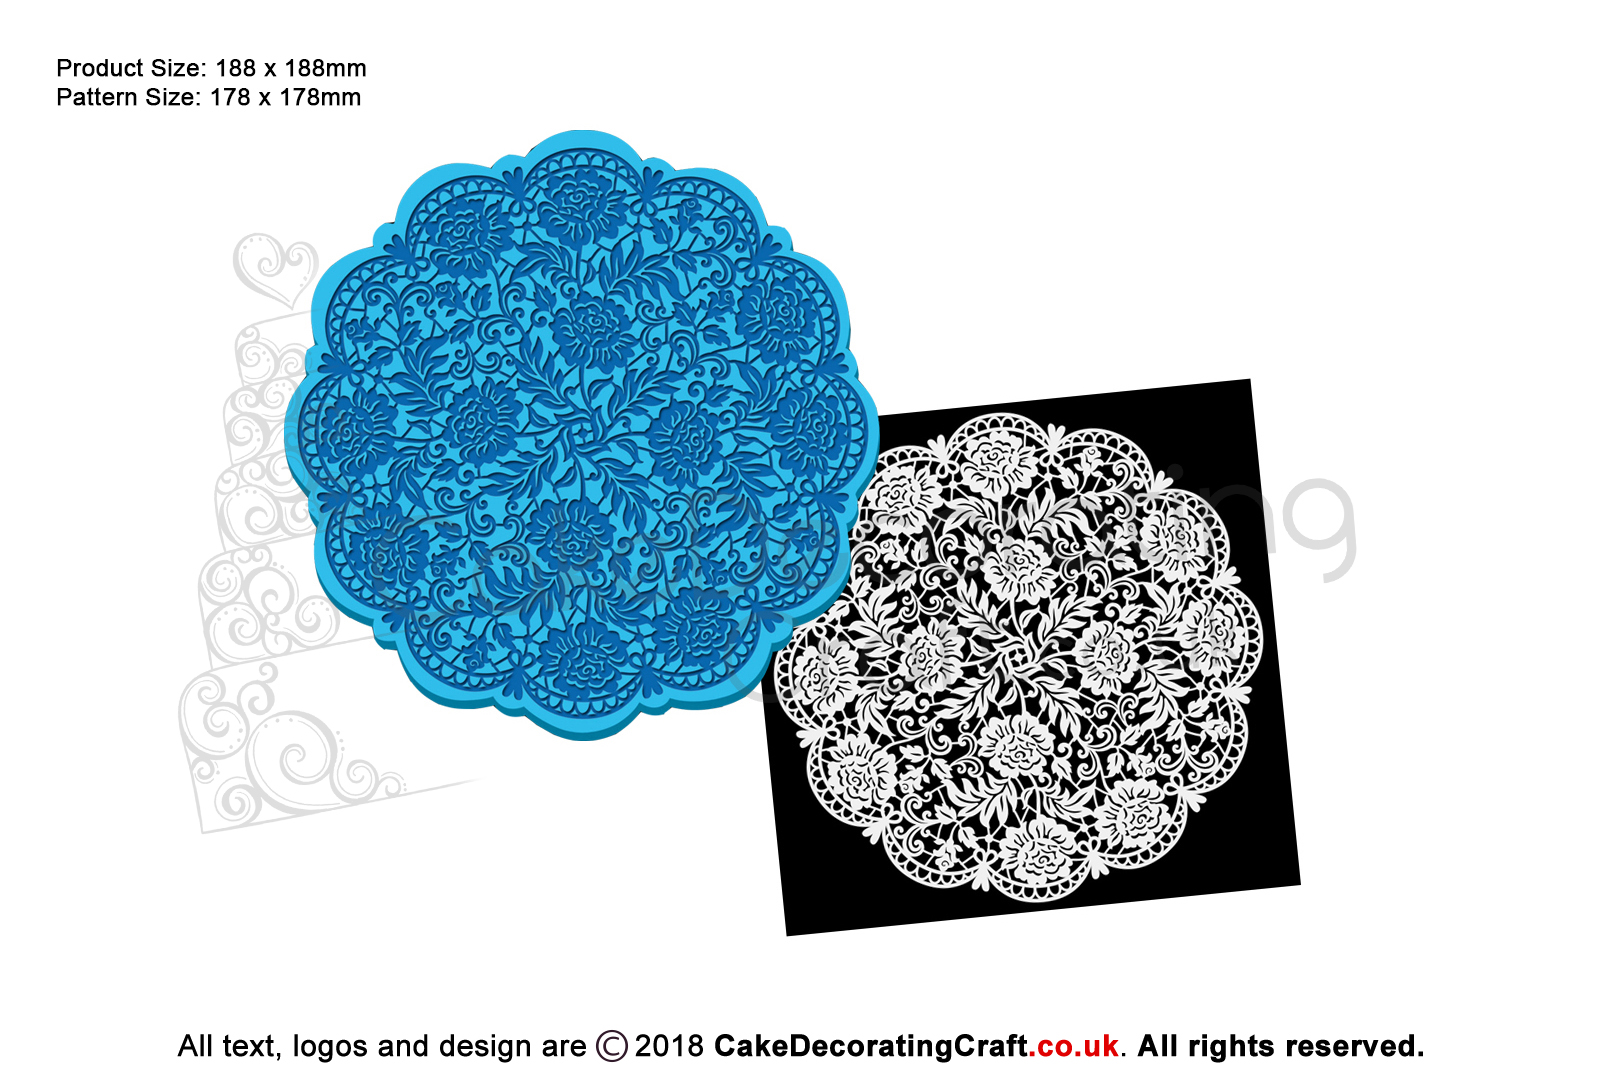 Floral Doily | Cake Lace Mats for Edible Cake Lace Mixes and Premixes | Cake Decorating Craft Tool